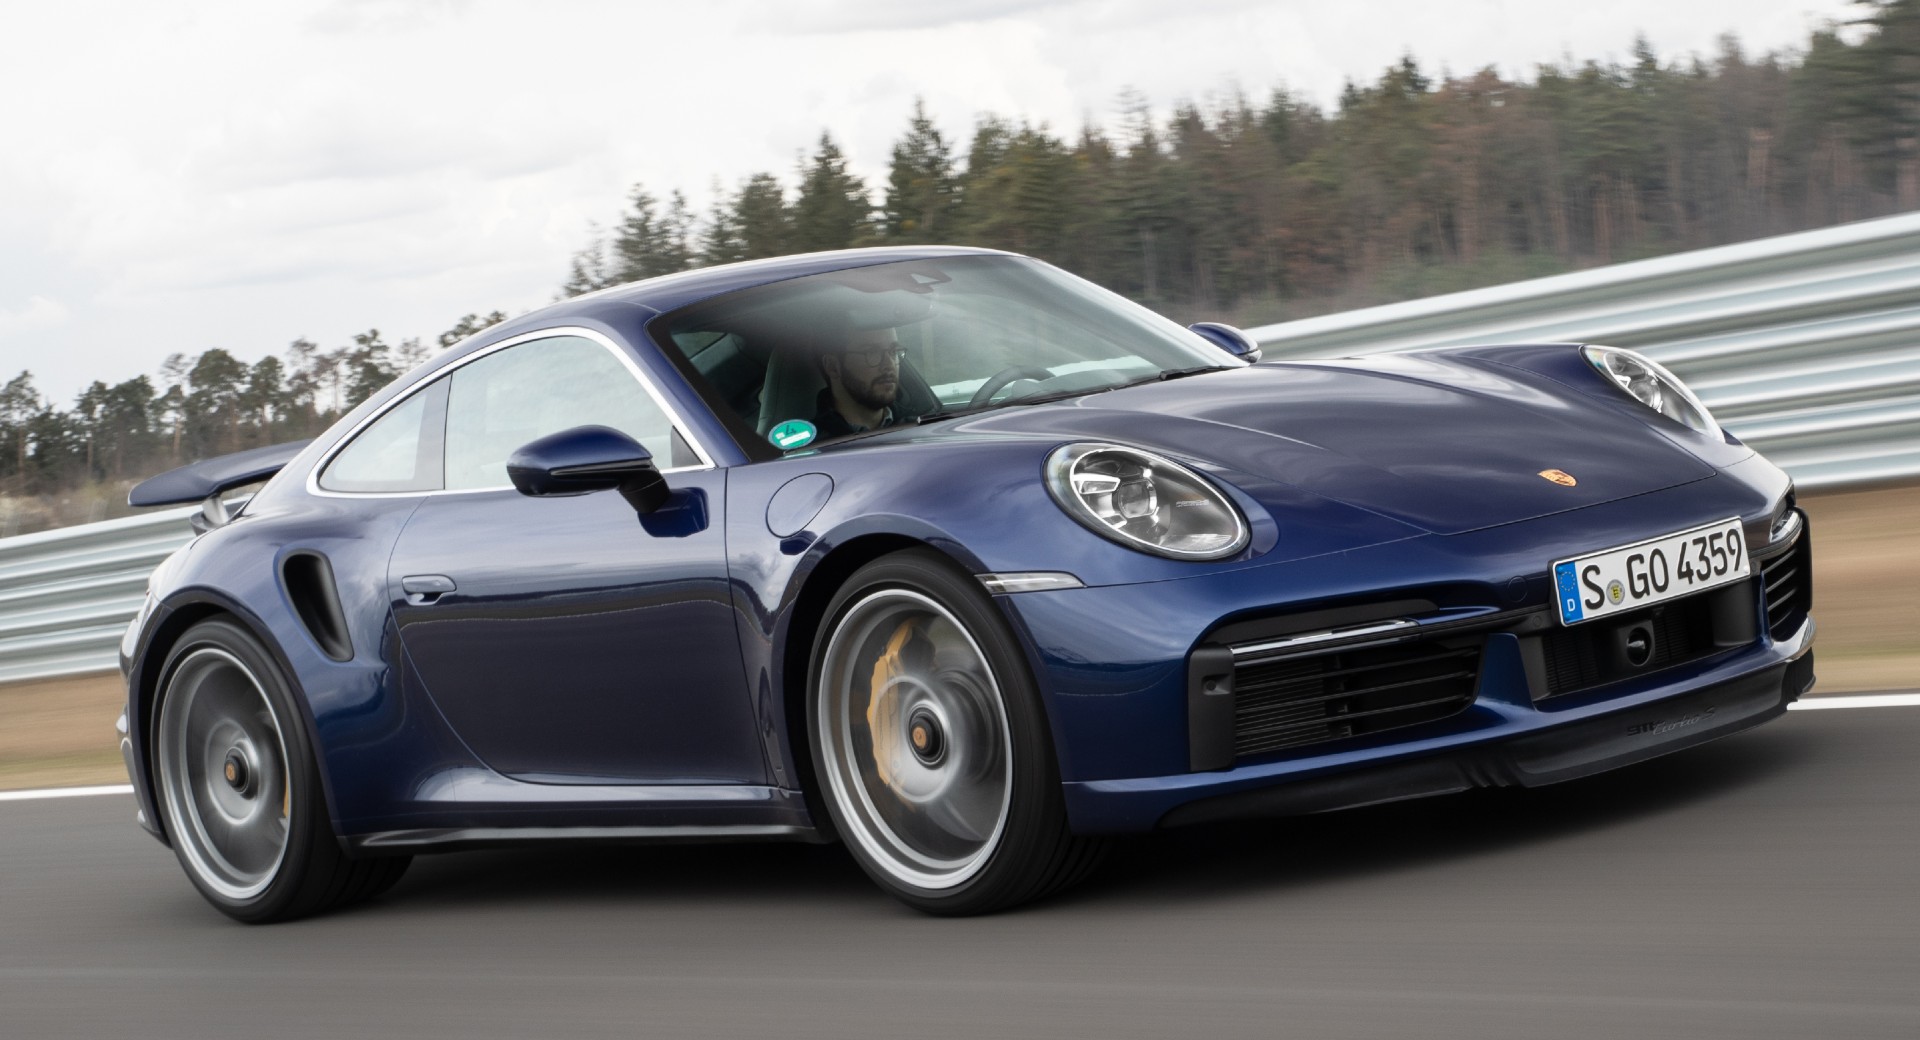 The 2021 Porsche 911 Turbo S Lightweight Does 060 In 2.1 Seconds And ¼